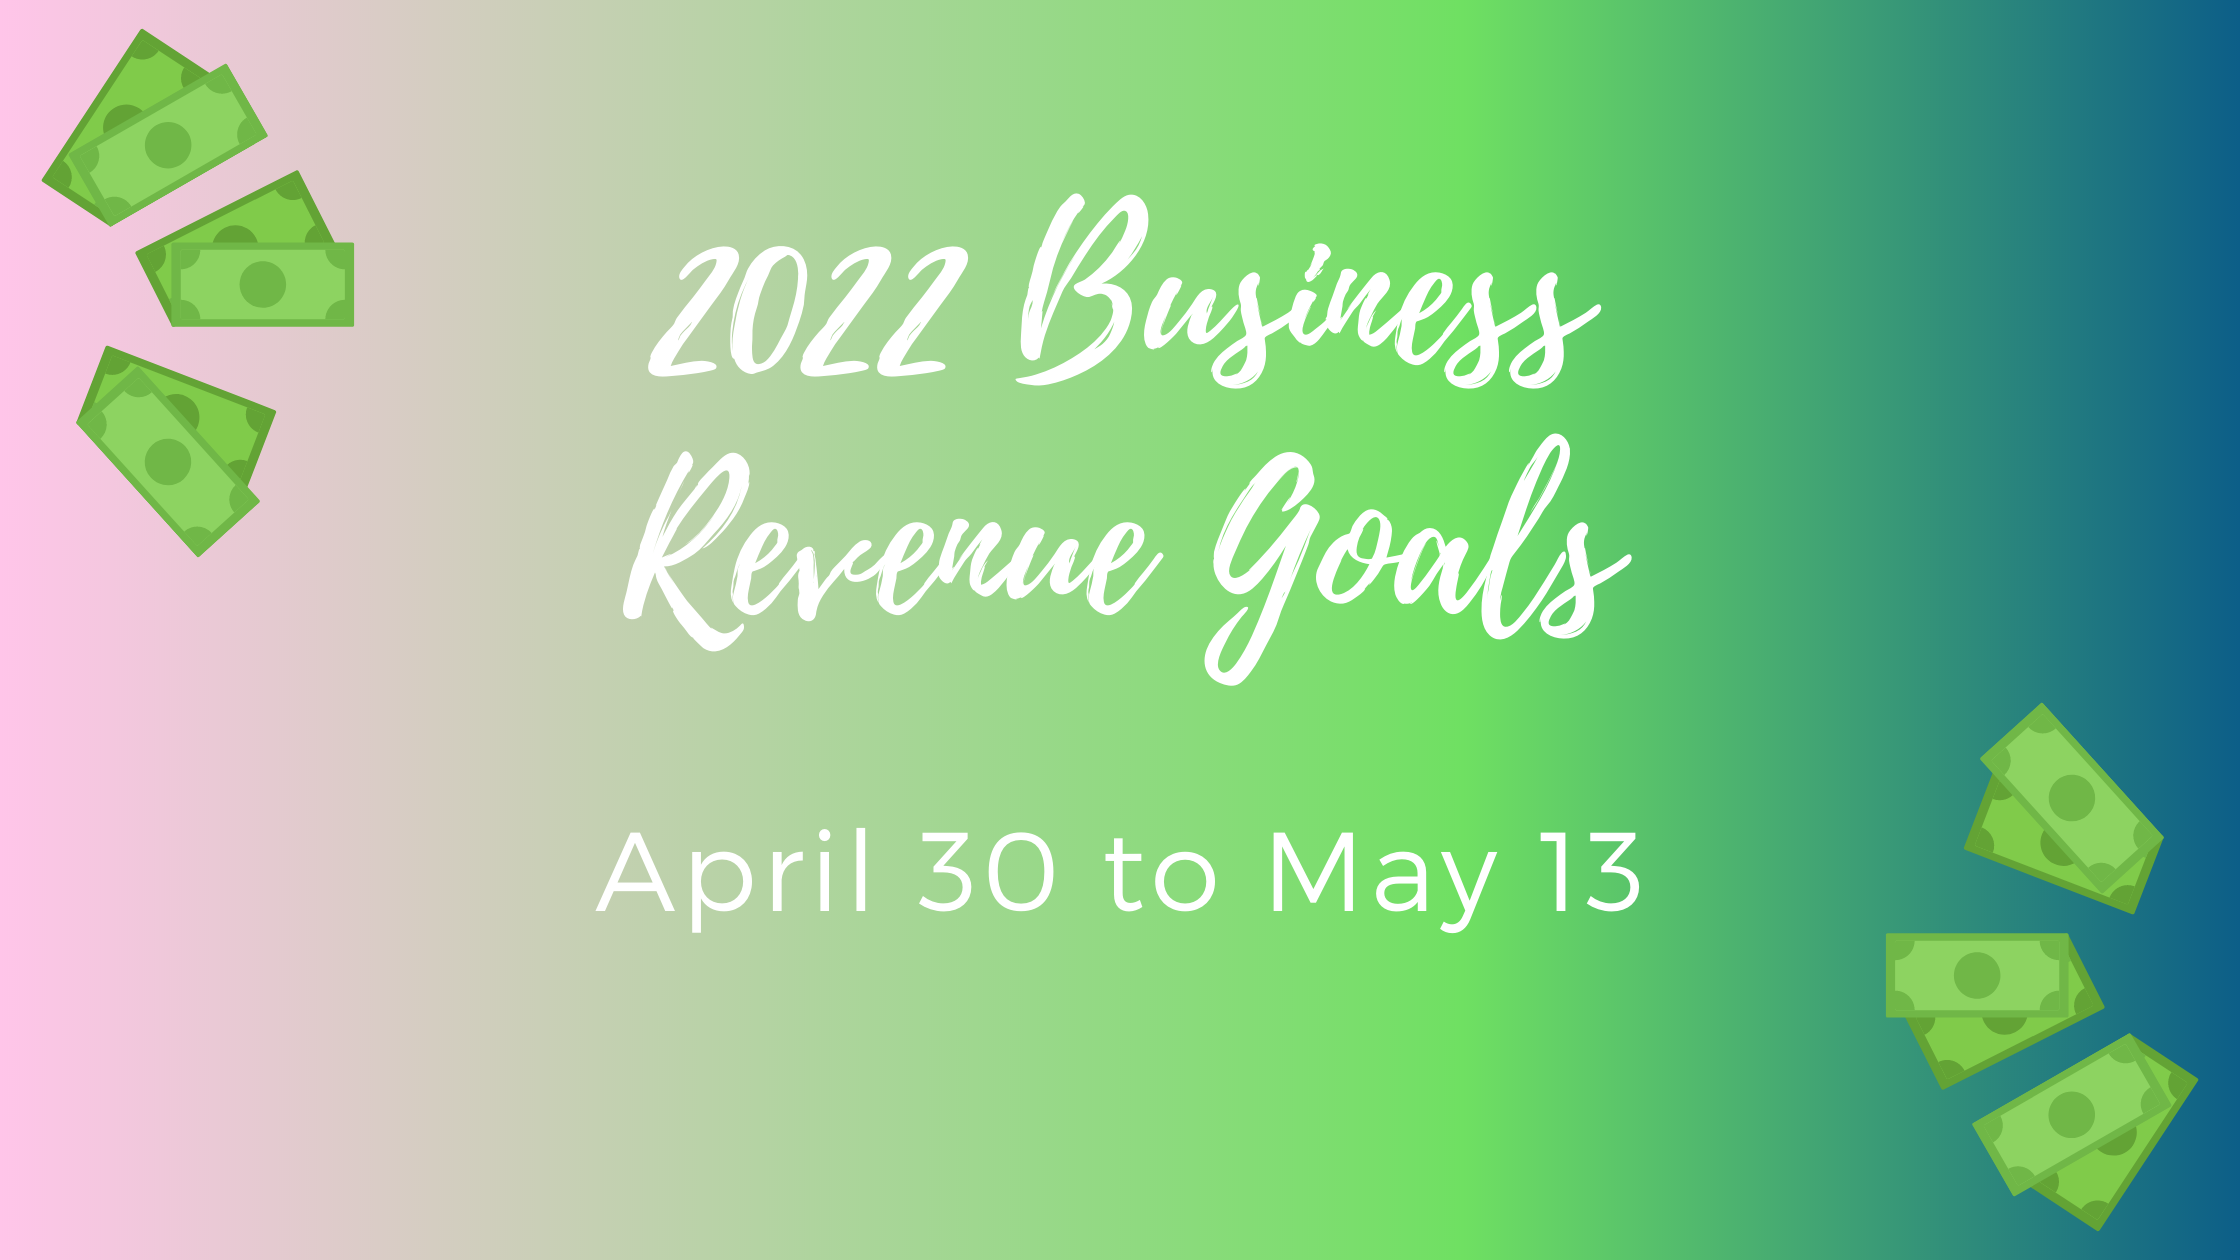 Business Goal Tracking for Weeks 18 and 19 of 2022